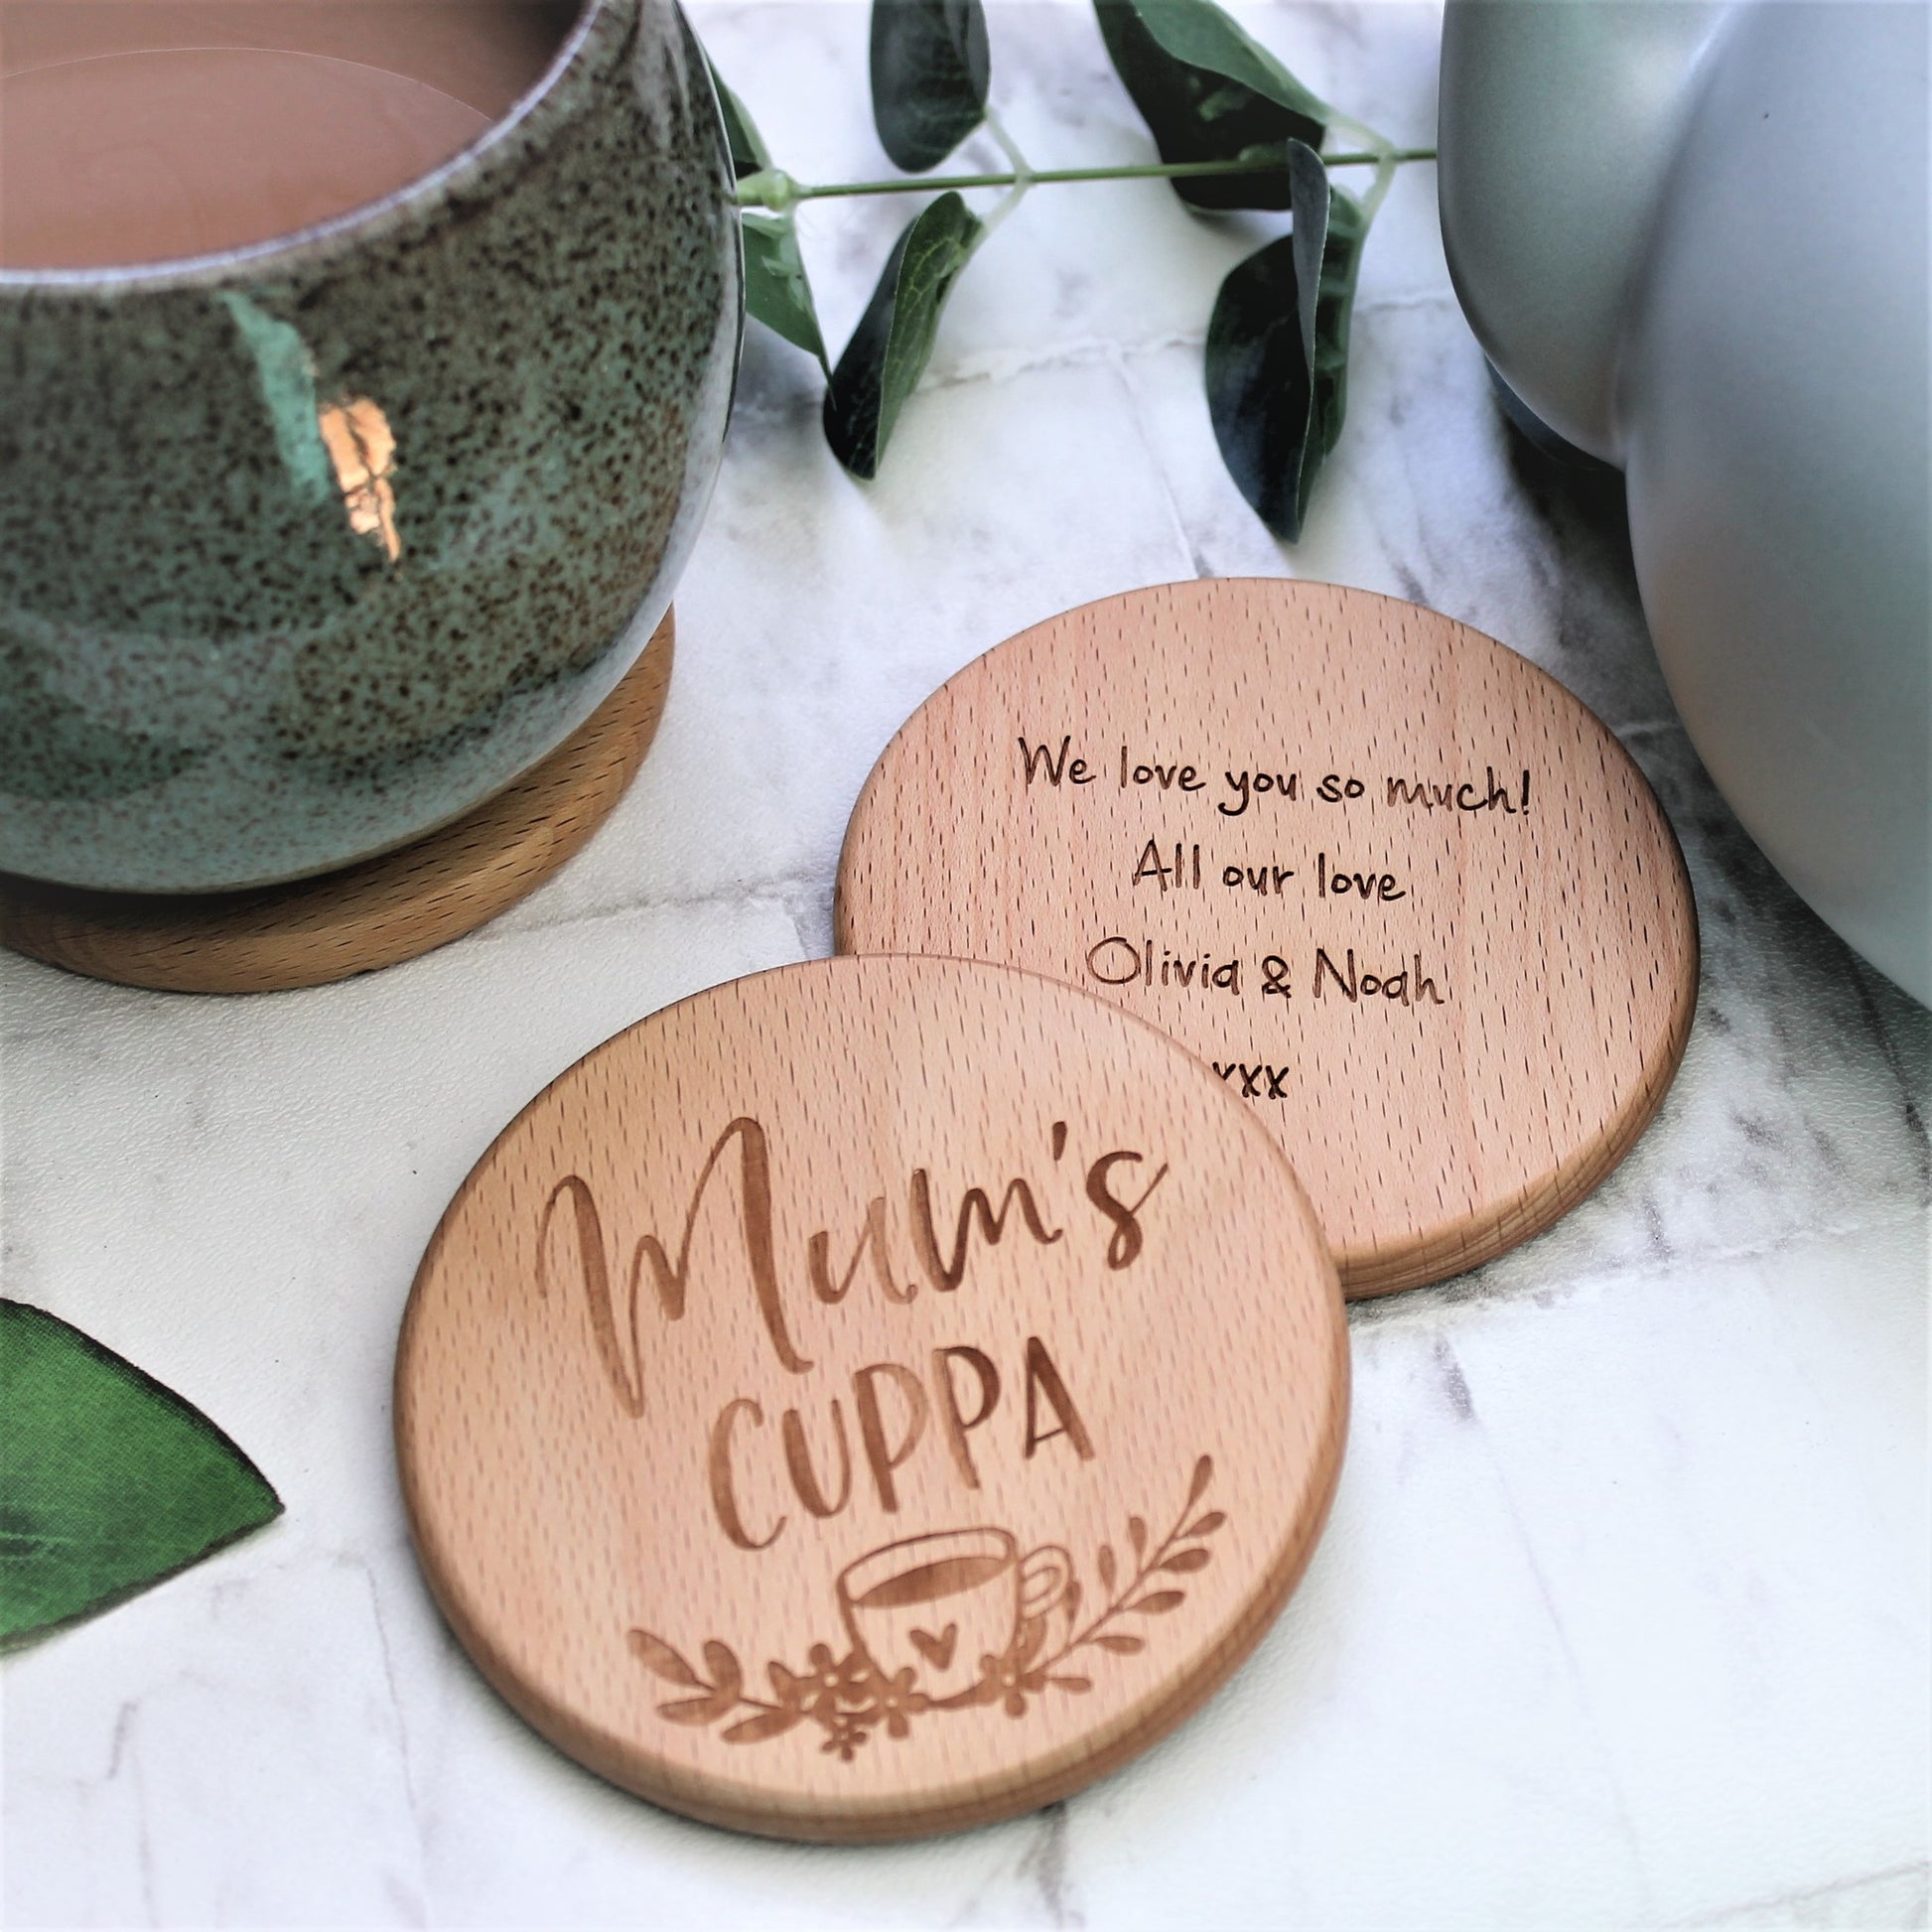 engraved wooden coaster for tea loving mum, engraved with the text mums cuppa with a floral design and tea cup 